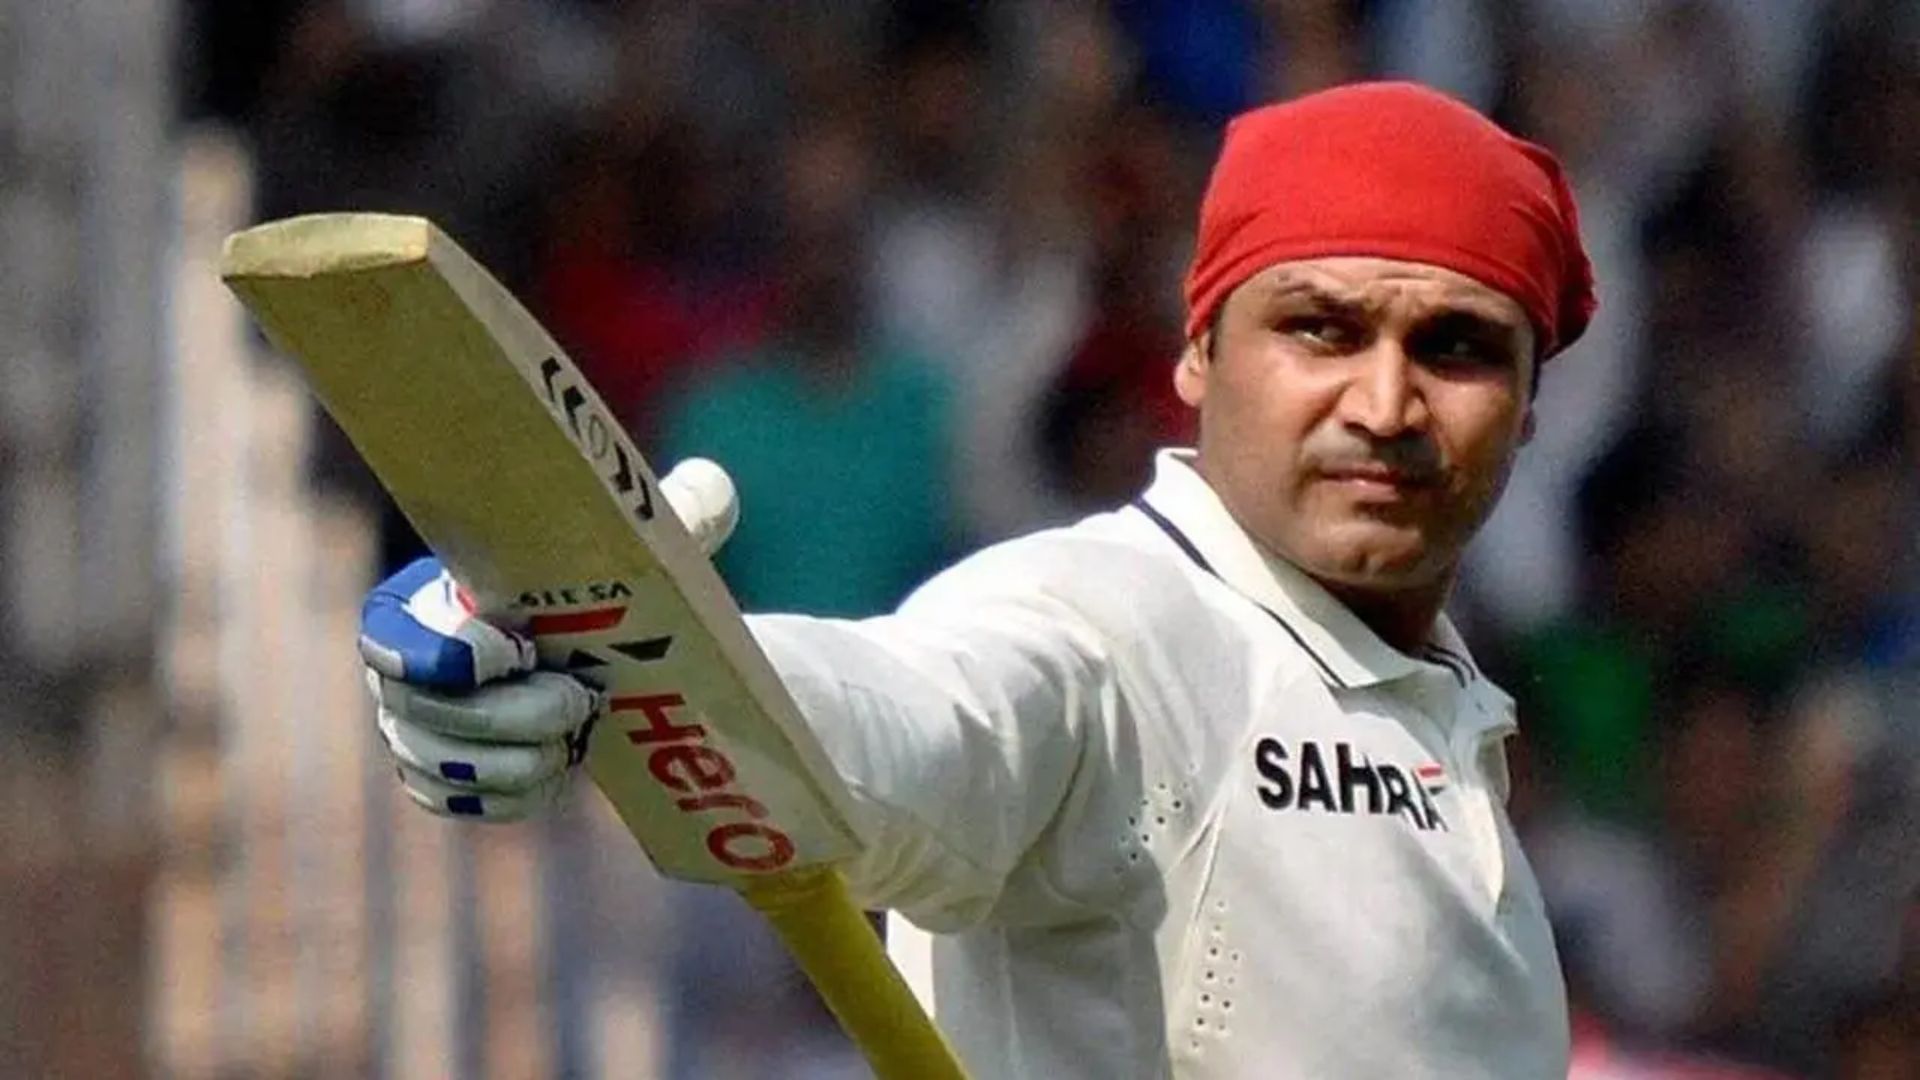 Virender Sehwag revolutionized the way Test openers played by his batting (P.C.:X)